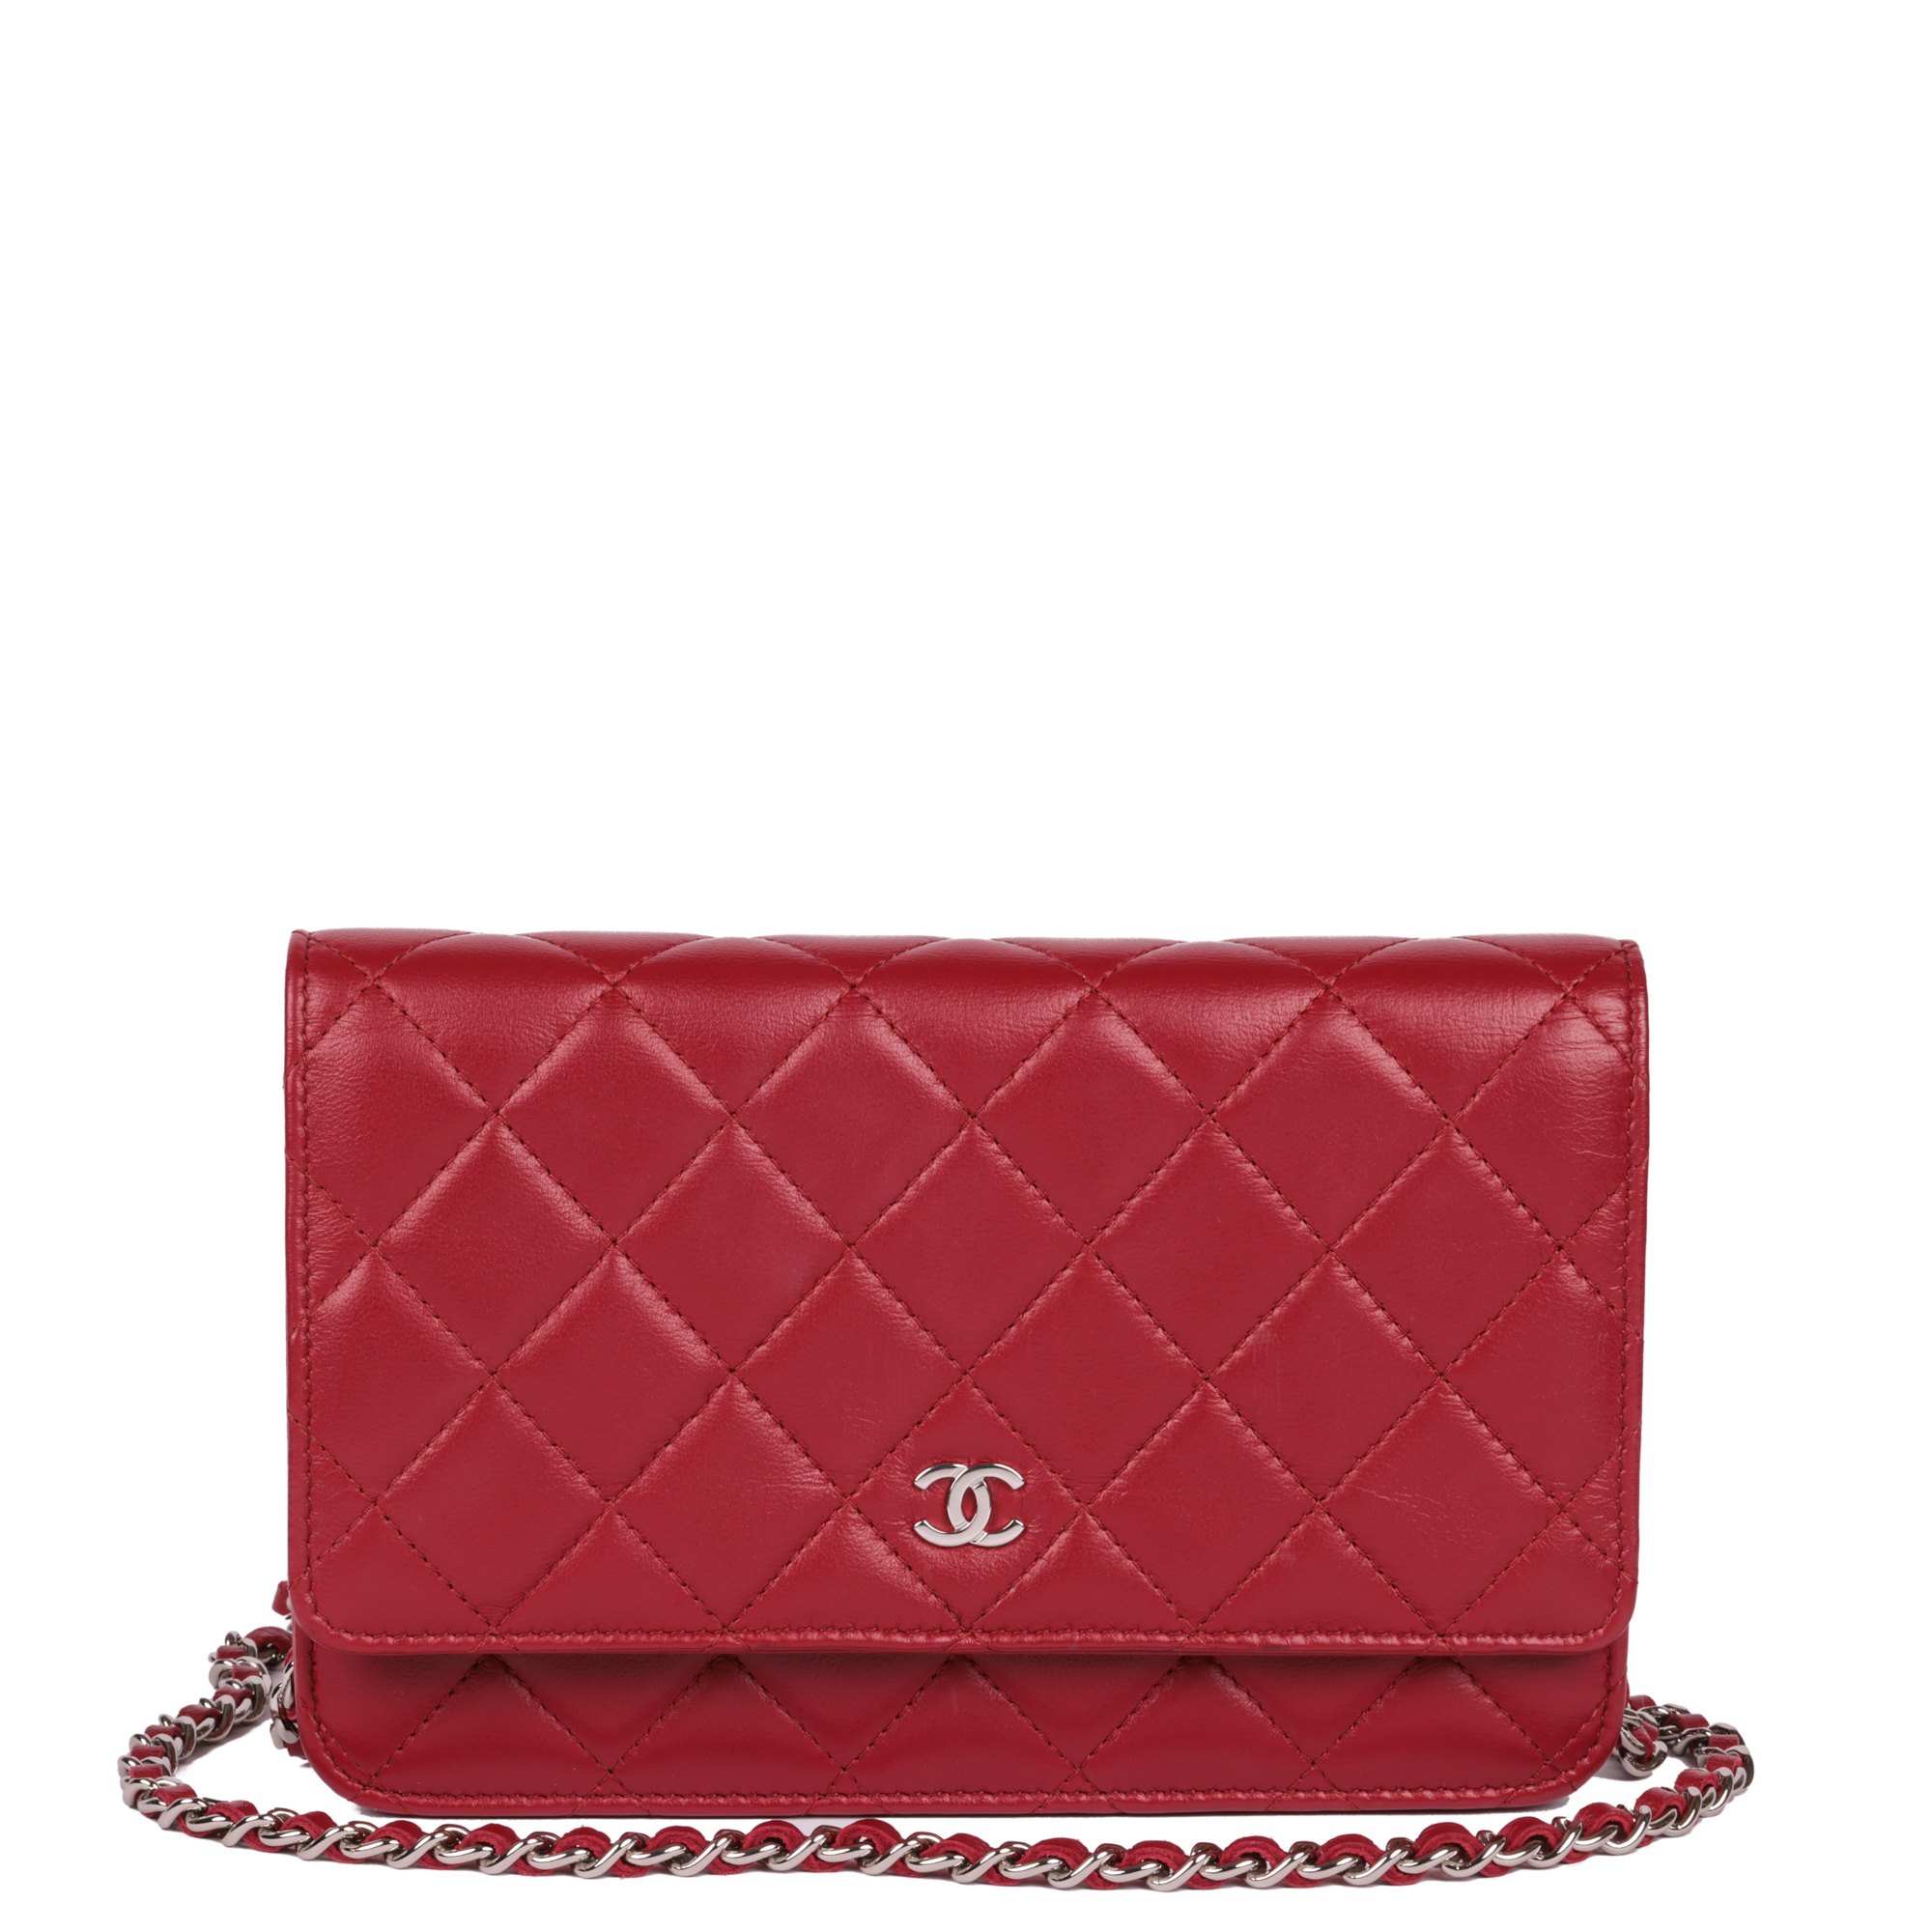 Chanel Red Quilted Lambskin Leather Wallet-on-Chain WOC